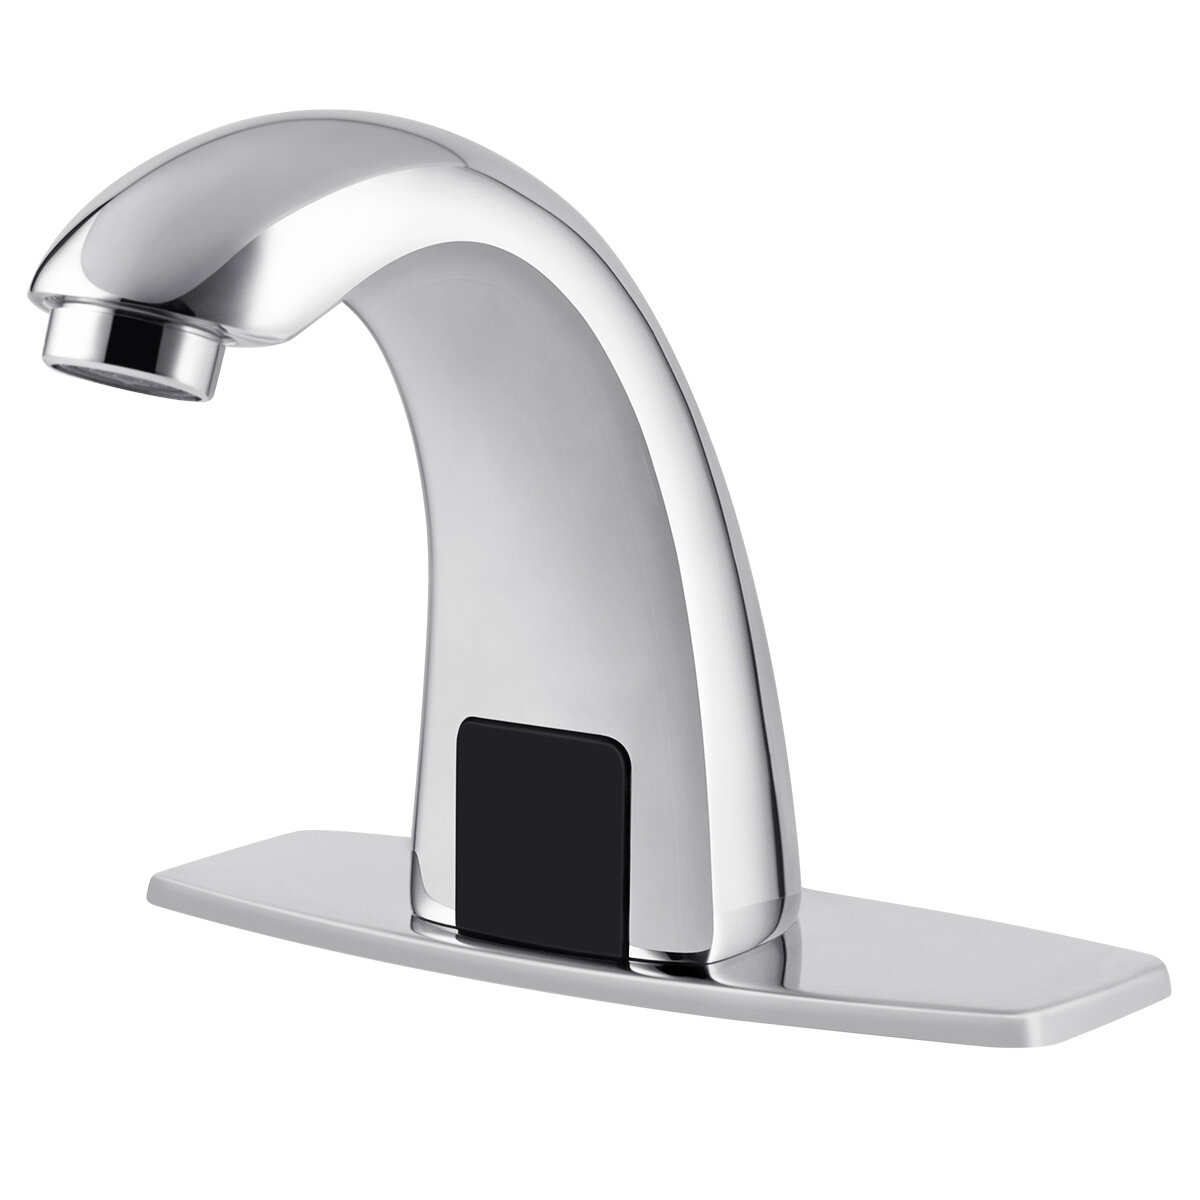 Hot Cold Water Mixed Electricity & Battery AC/DC Powered Solid Brass Chrome Gimify Touchless Sensor Bathroom Faucet Automatic Smart Single Hole Hands Free Sink Tap w/Hole Cover Deck Plate 